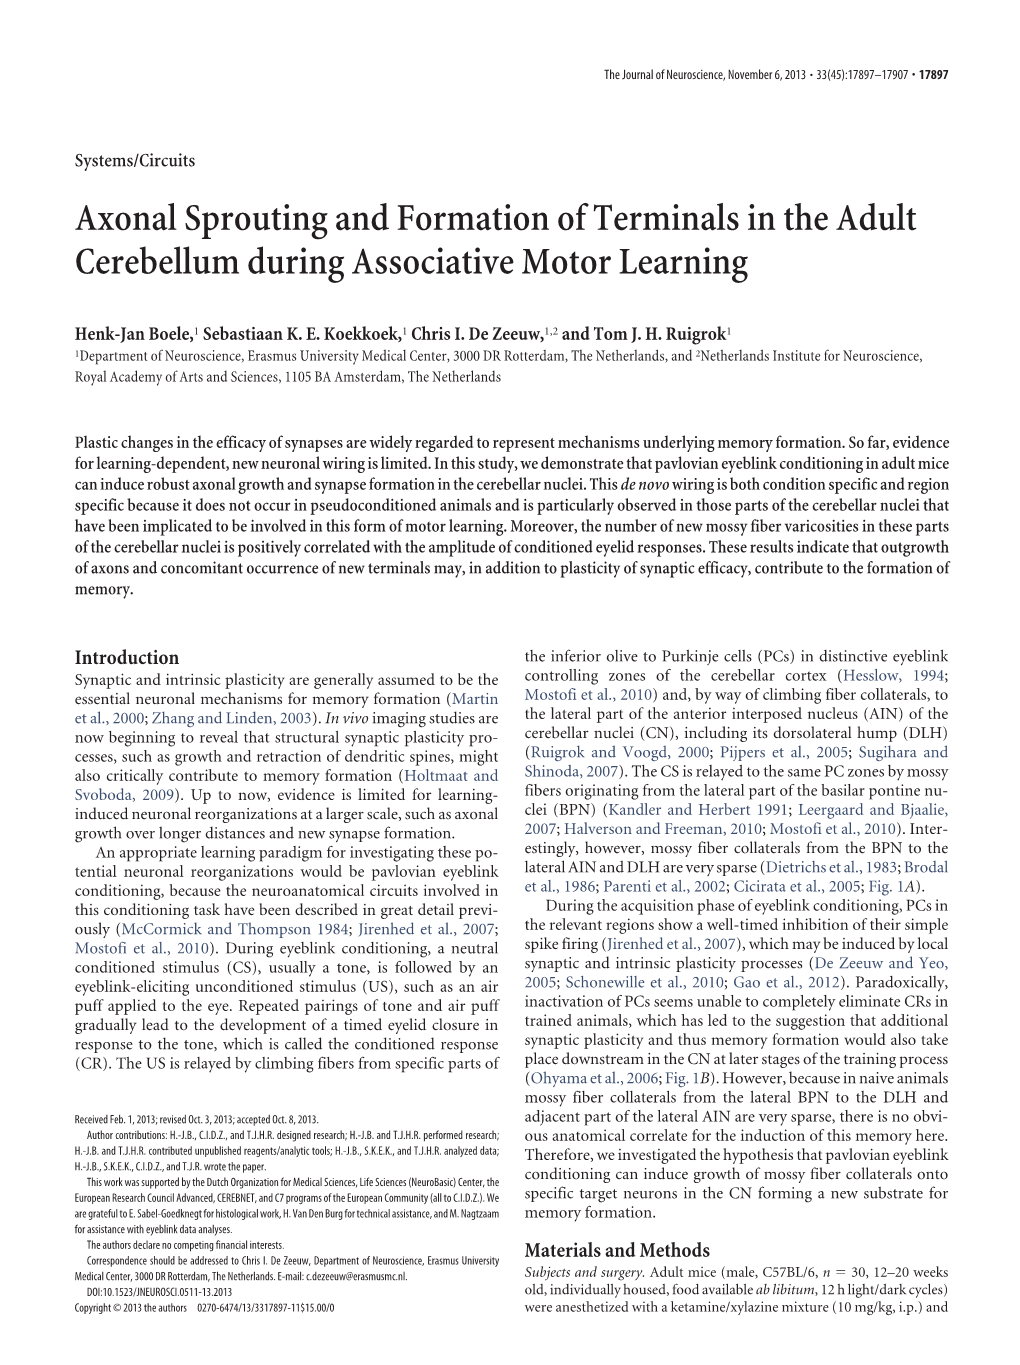 Axonal Sprouting and Formation of Terminals in the Adult Cerebellum During Associative Motor Learning